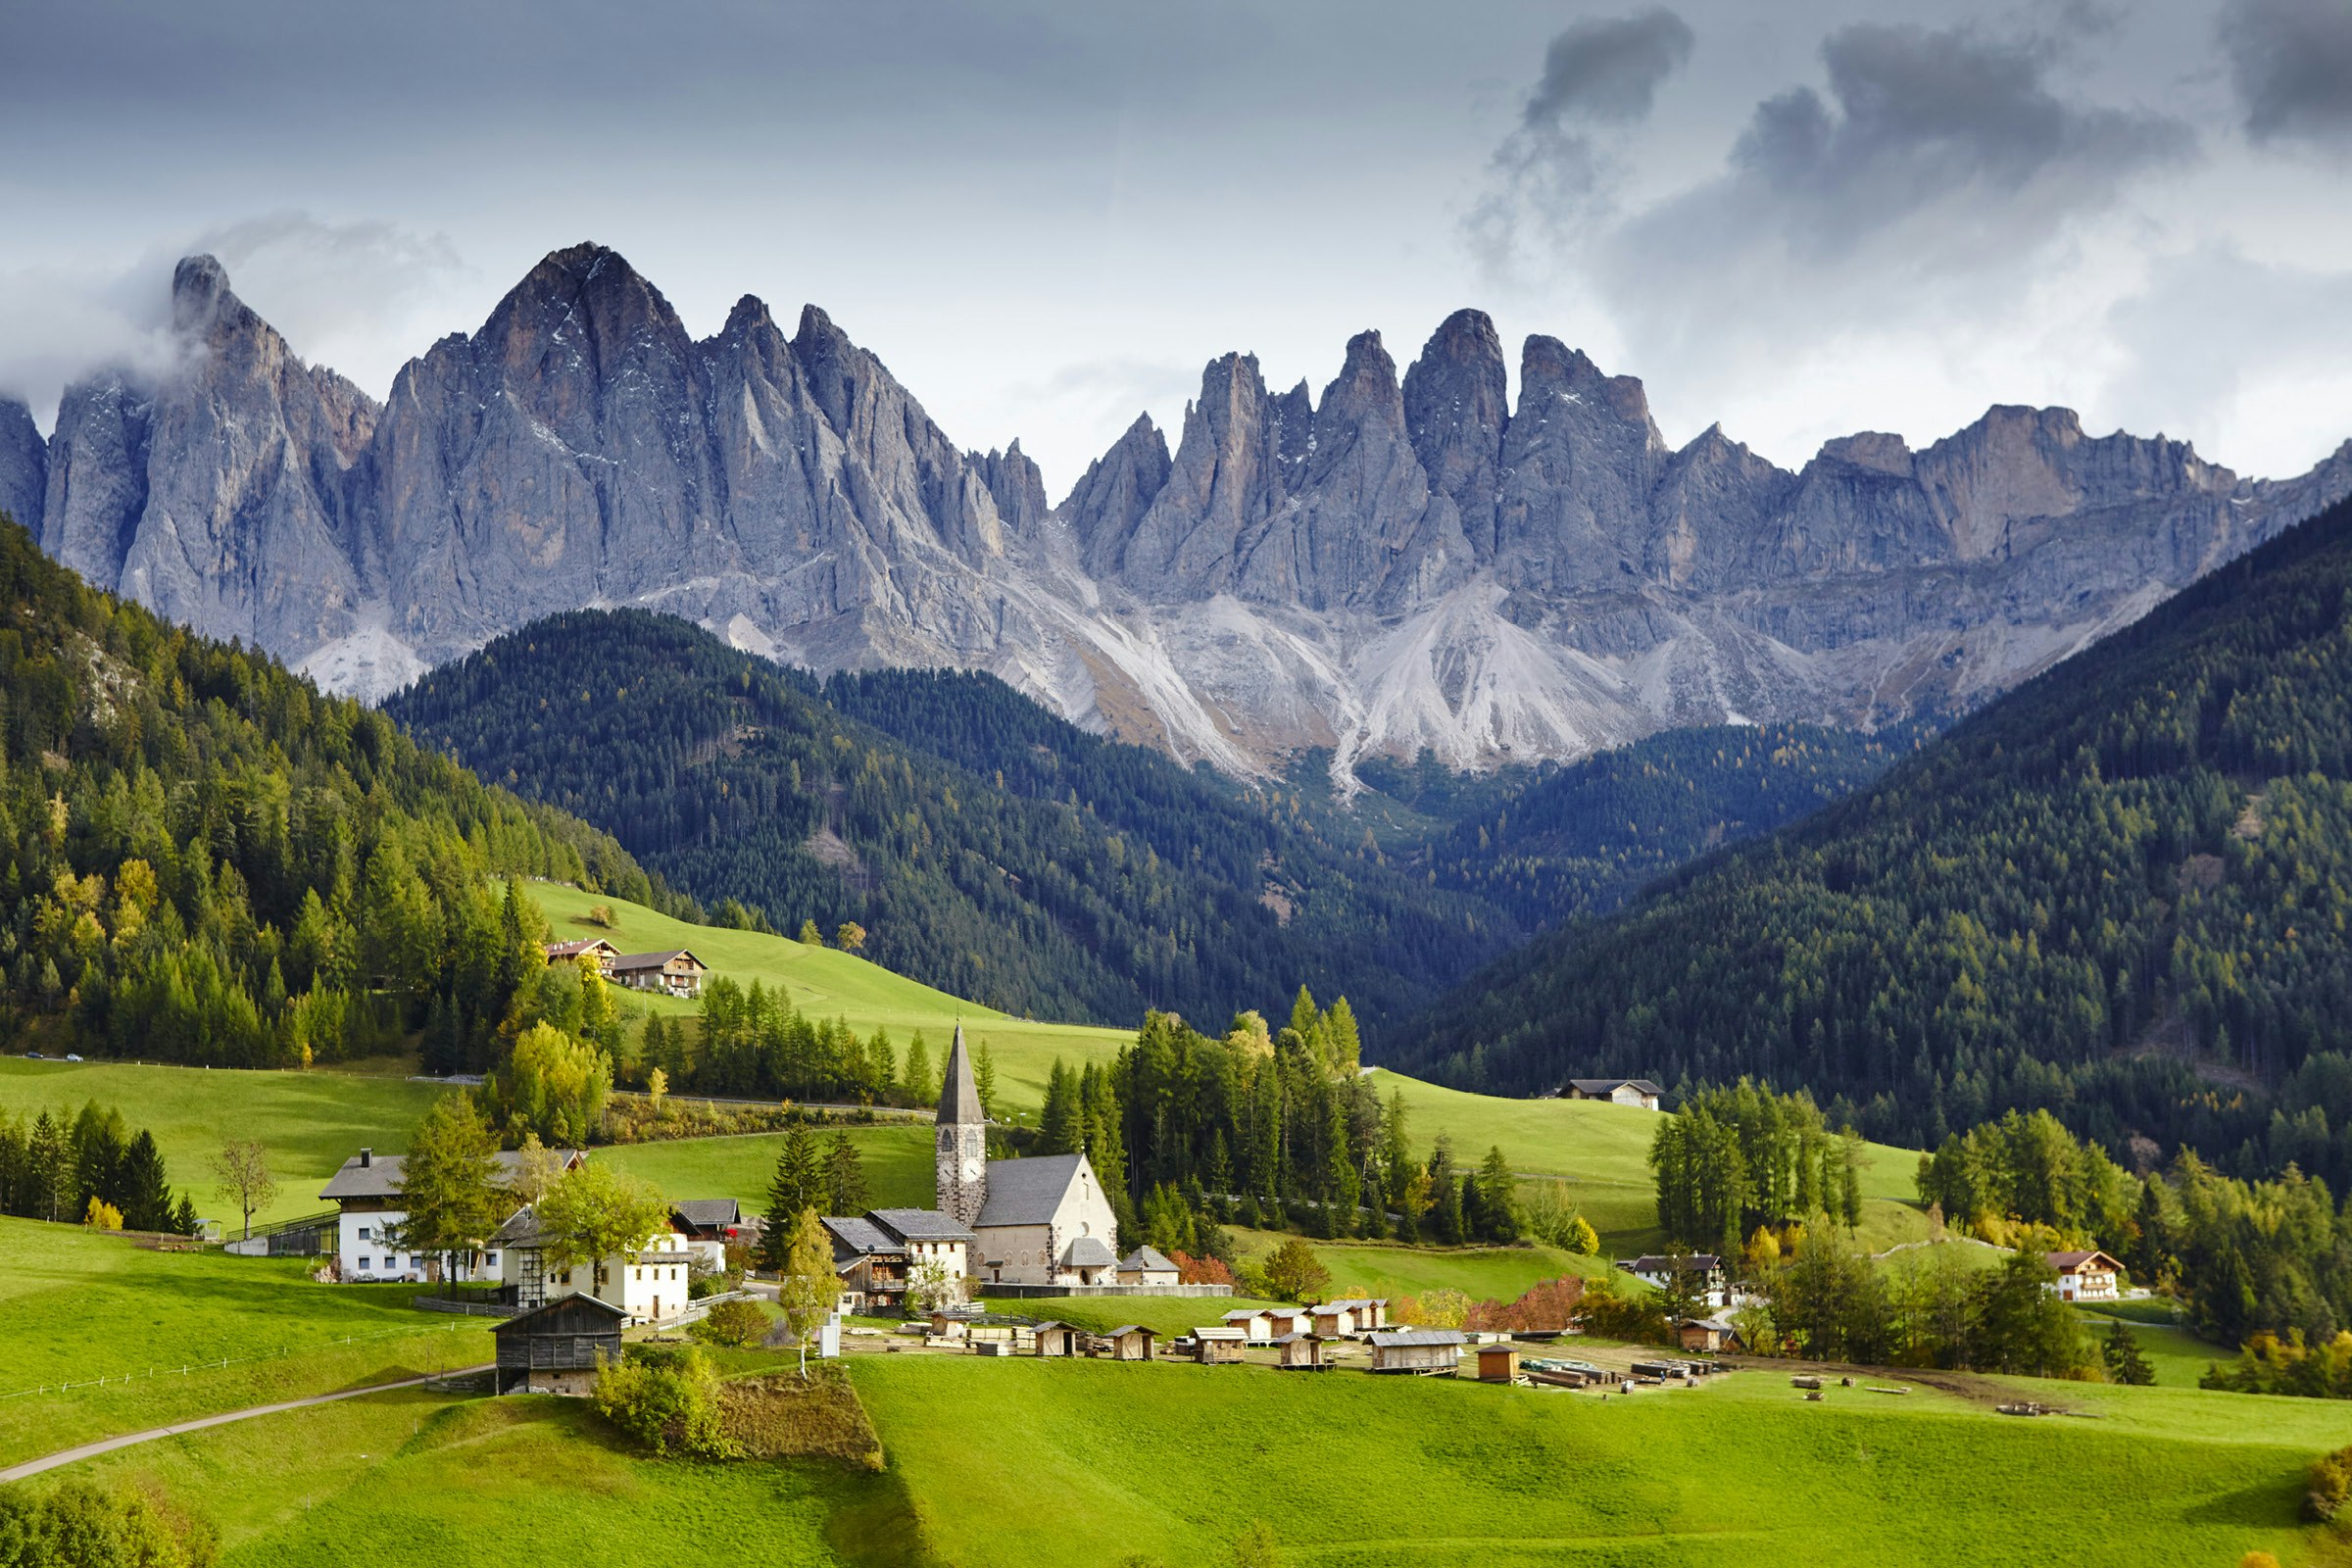 Jagged peaks form a backdrop to a church and farmhouses set in green meadows